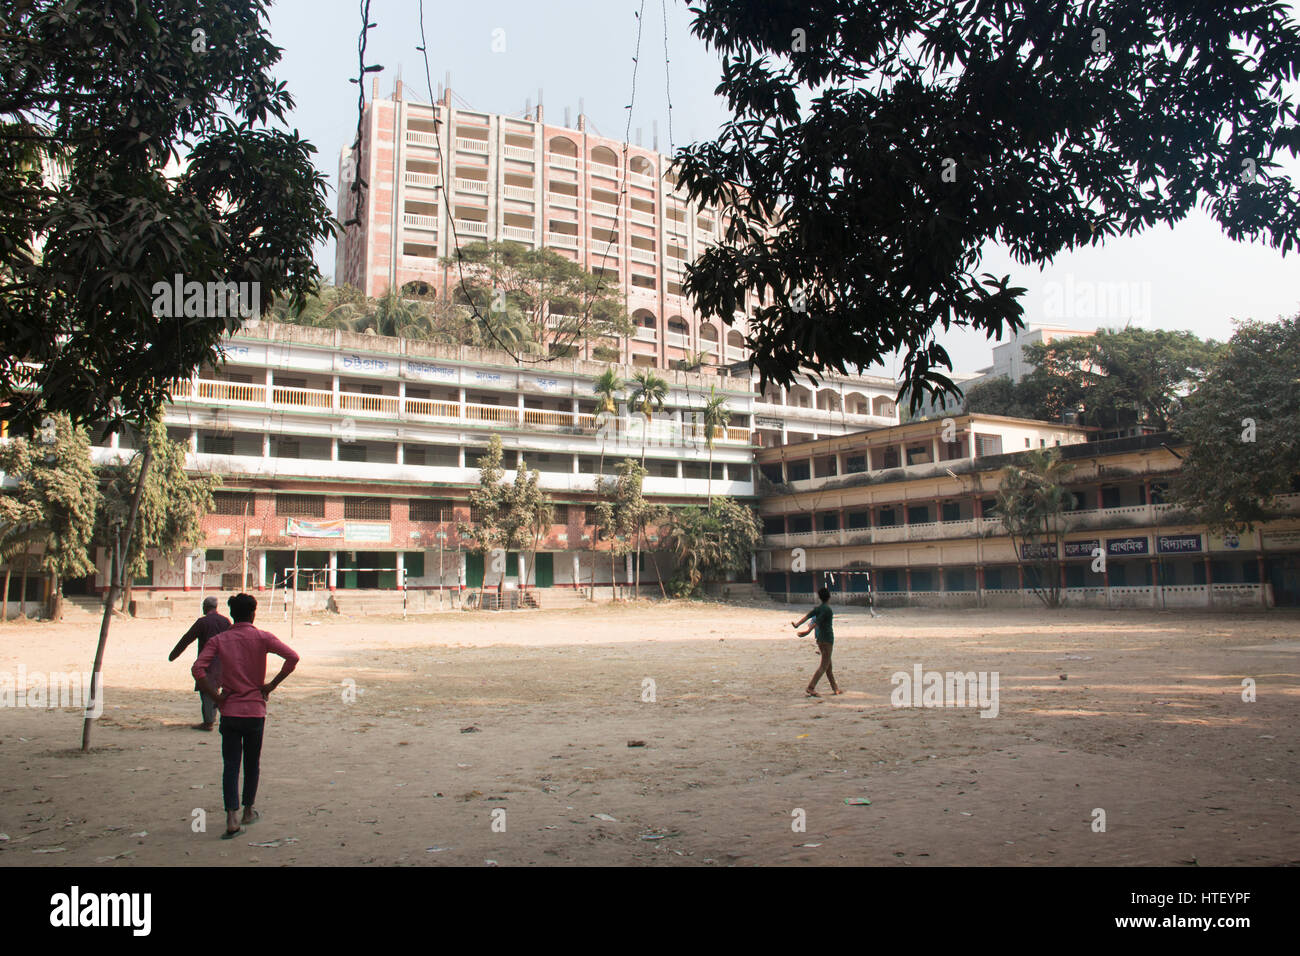 CHITTAGONG, BANGLADESH - FEBRUARY 2017: Children playing cricket in an old school in Chittagong in Bangladesh Stock Photo